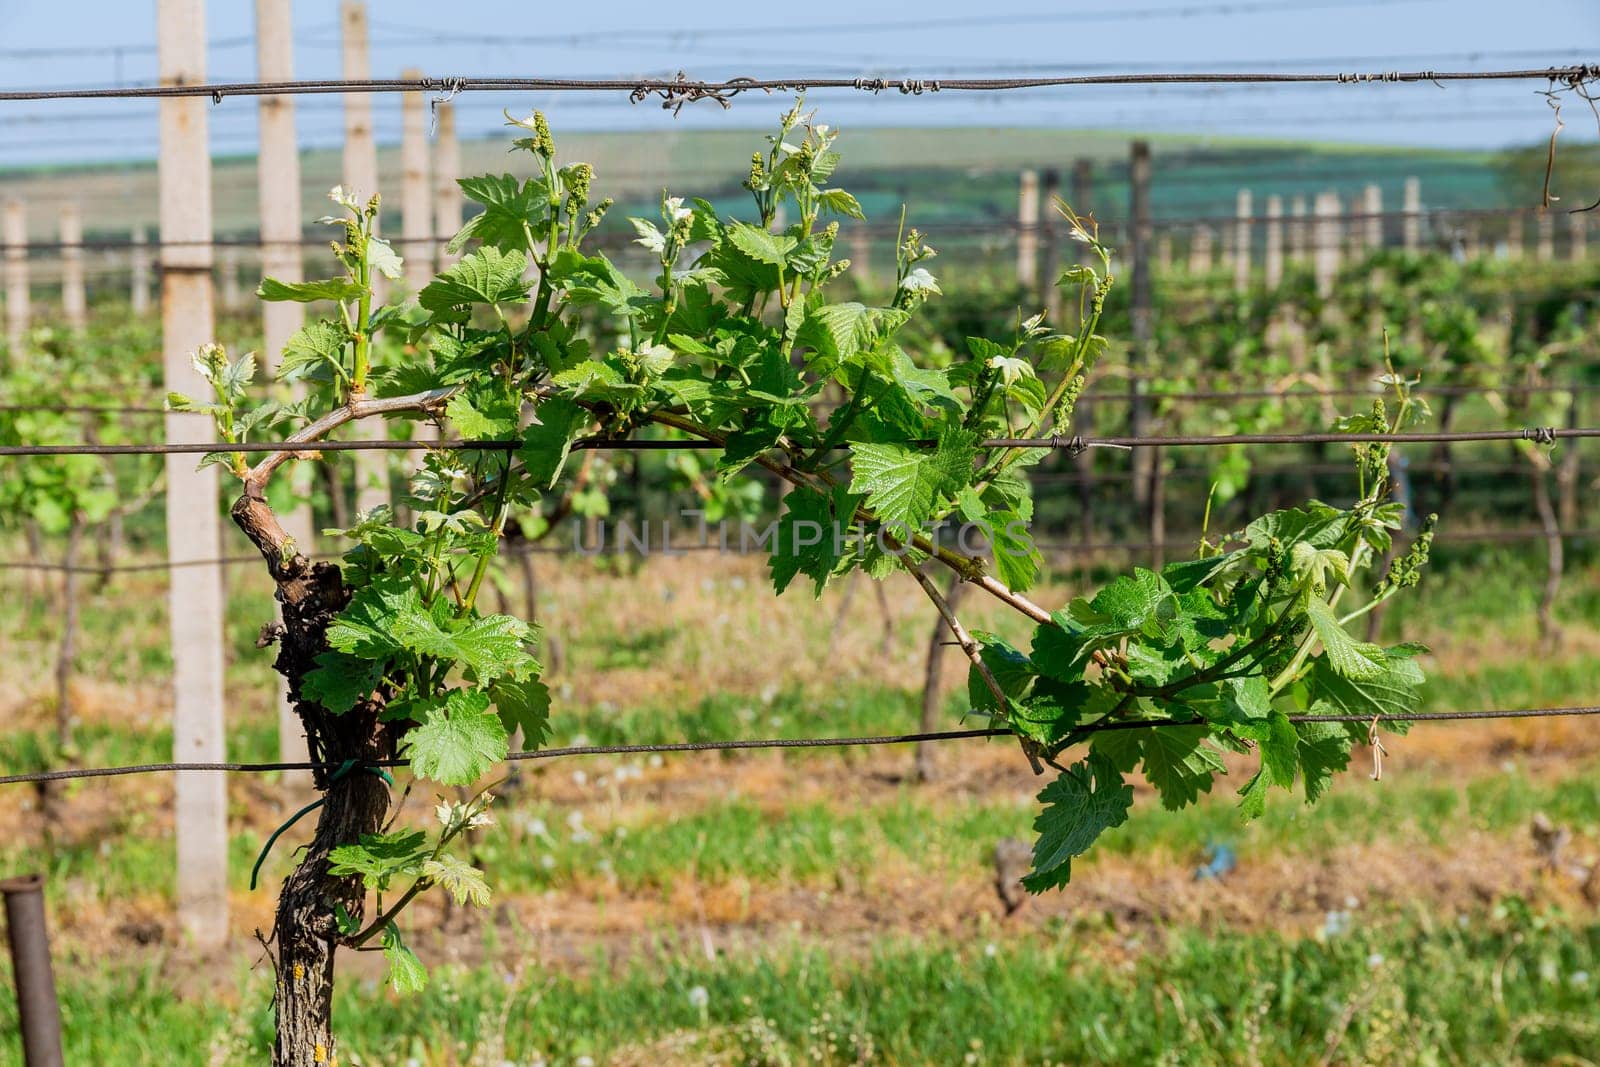 Lush green vineyards make for a stunning sight in countryside. Grapes come in various colors and flavors, reflecting the terroir of the vineyard.